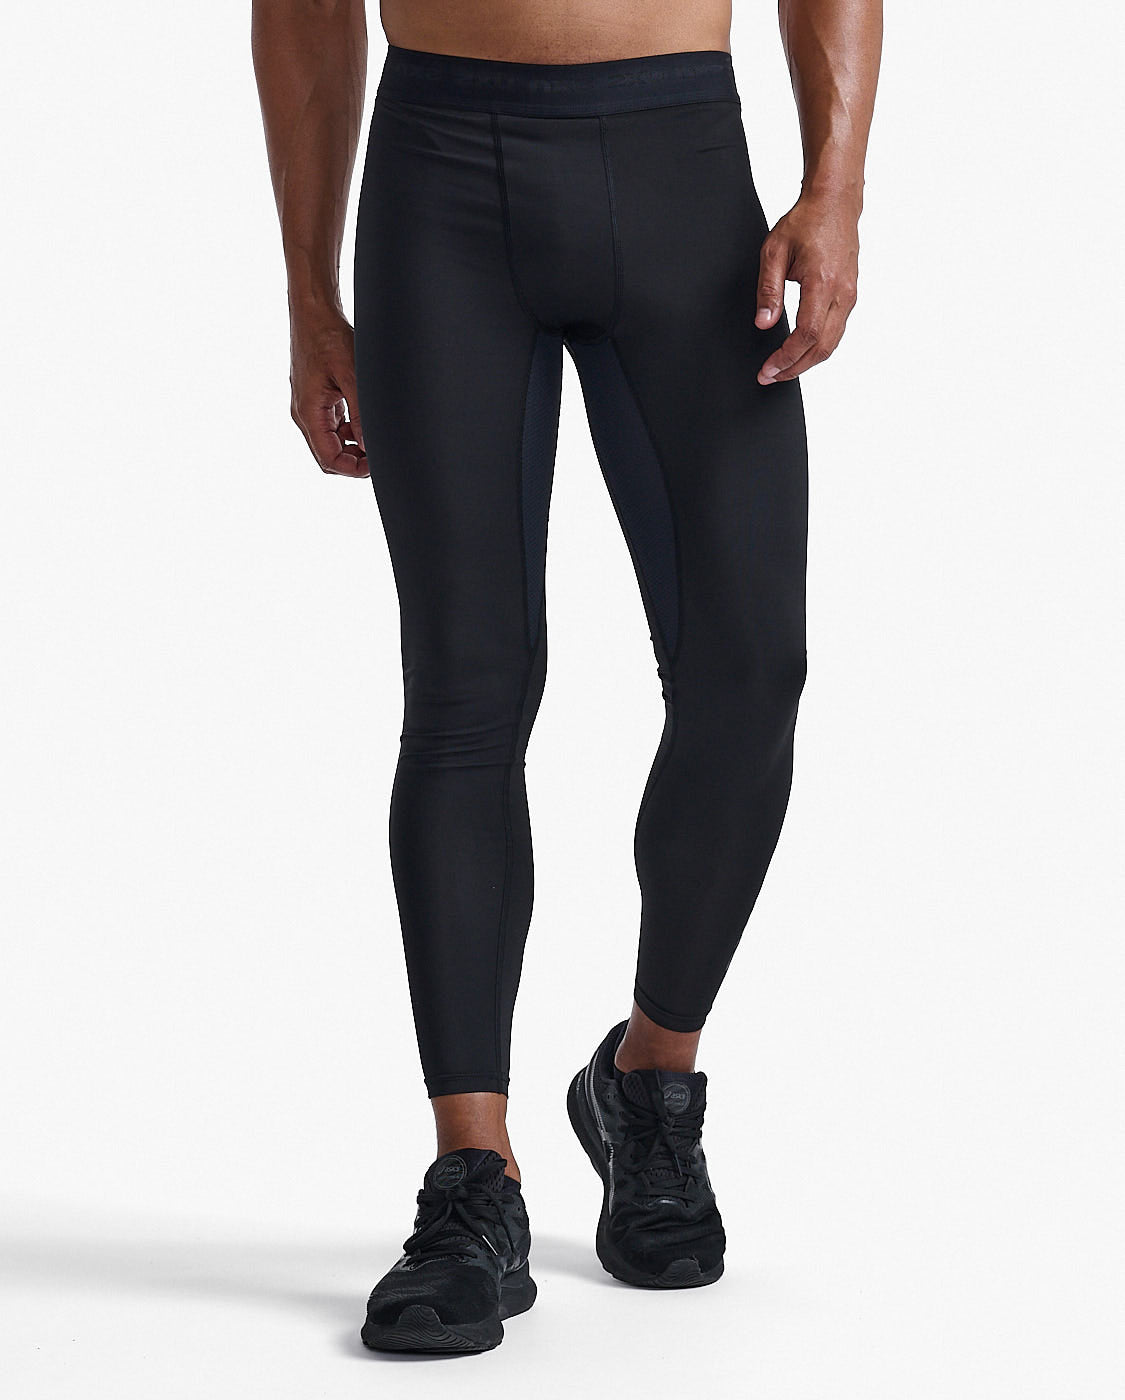 Nike Factory Store 3/4 Length Football Compression & Baselayer.